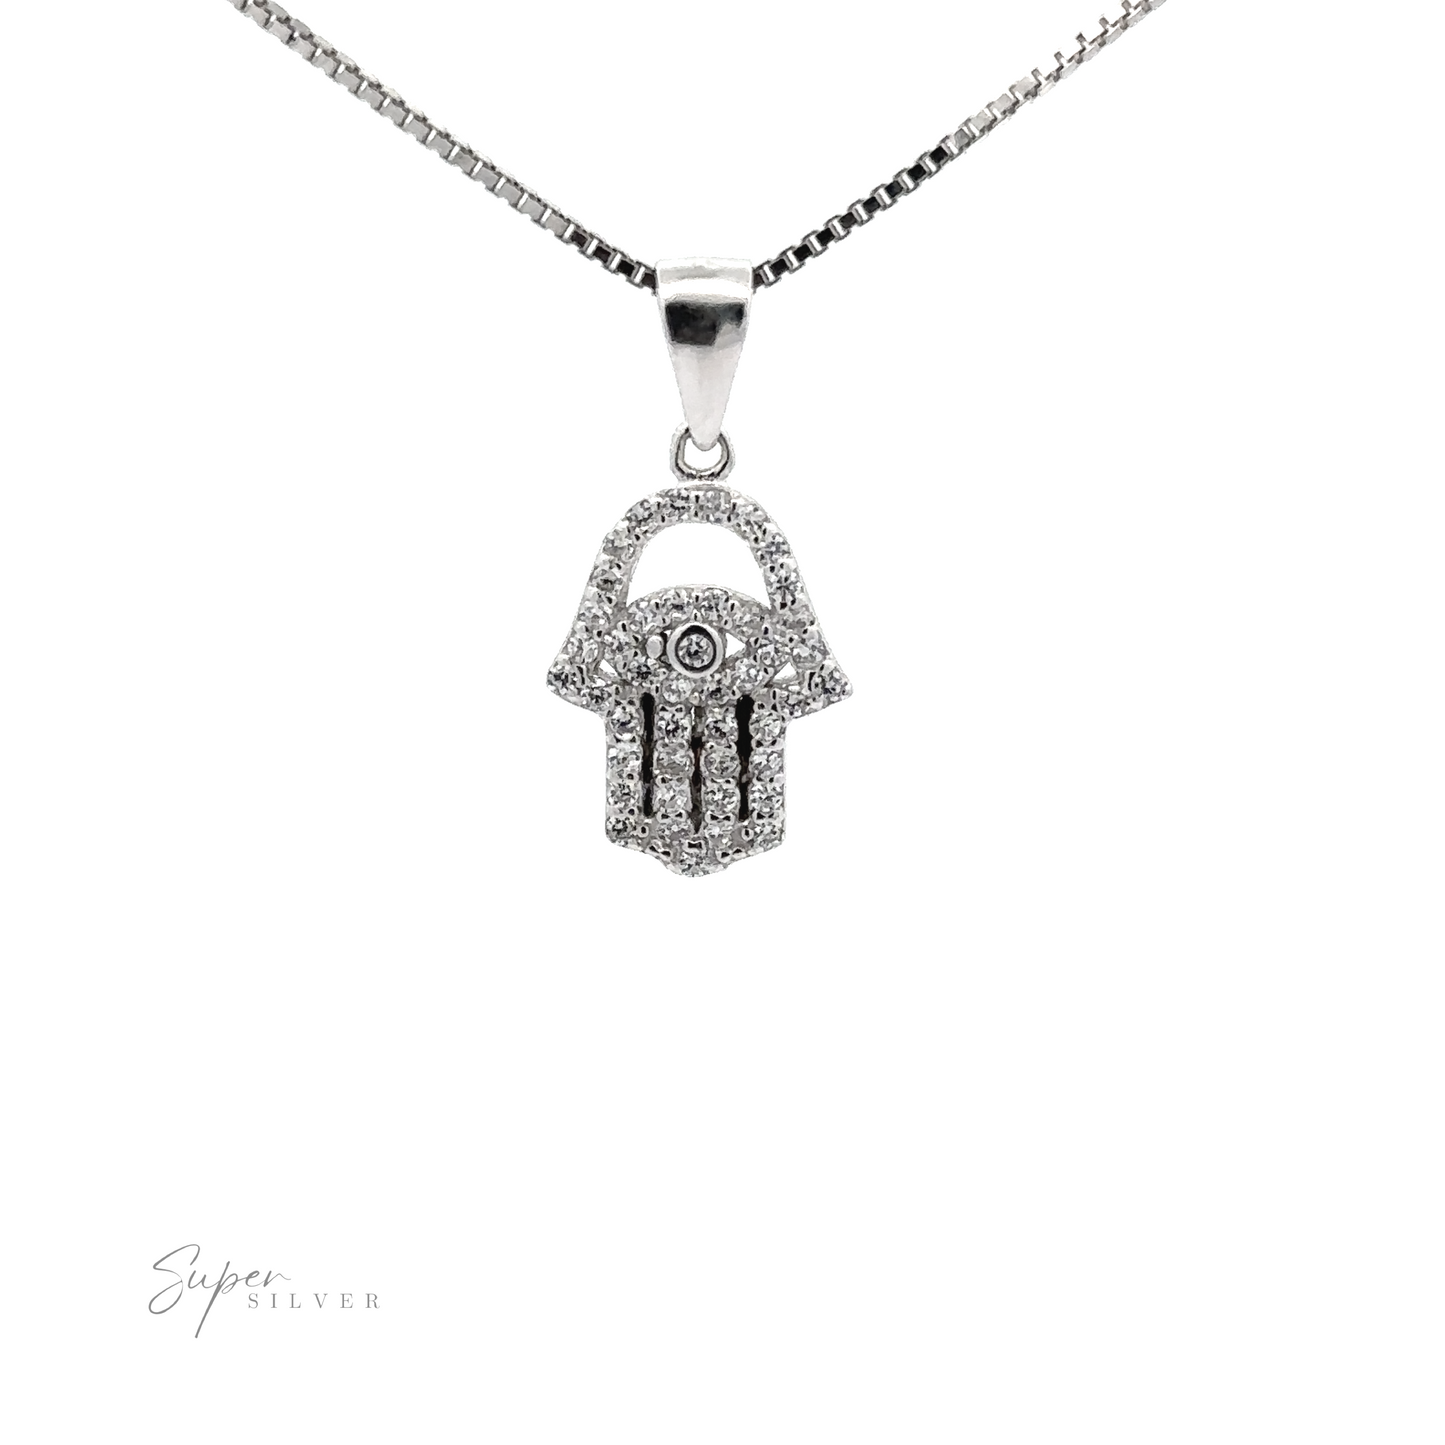 
                  
                    A rhodium plated sterling silver necklace featuring a Small Cubic Zirconia Hamsa Pendant, shaped like a stylized hand with an eye in the center, adorned with small clear cubic zirconia stones.
                  
                